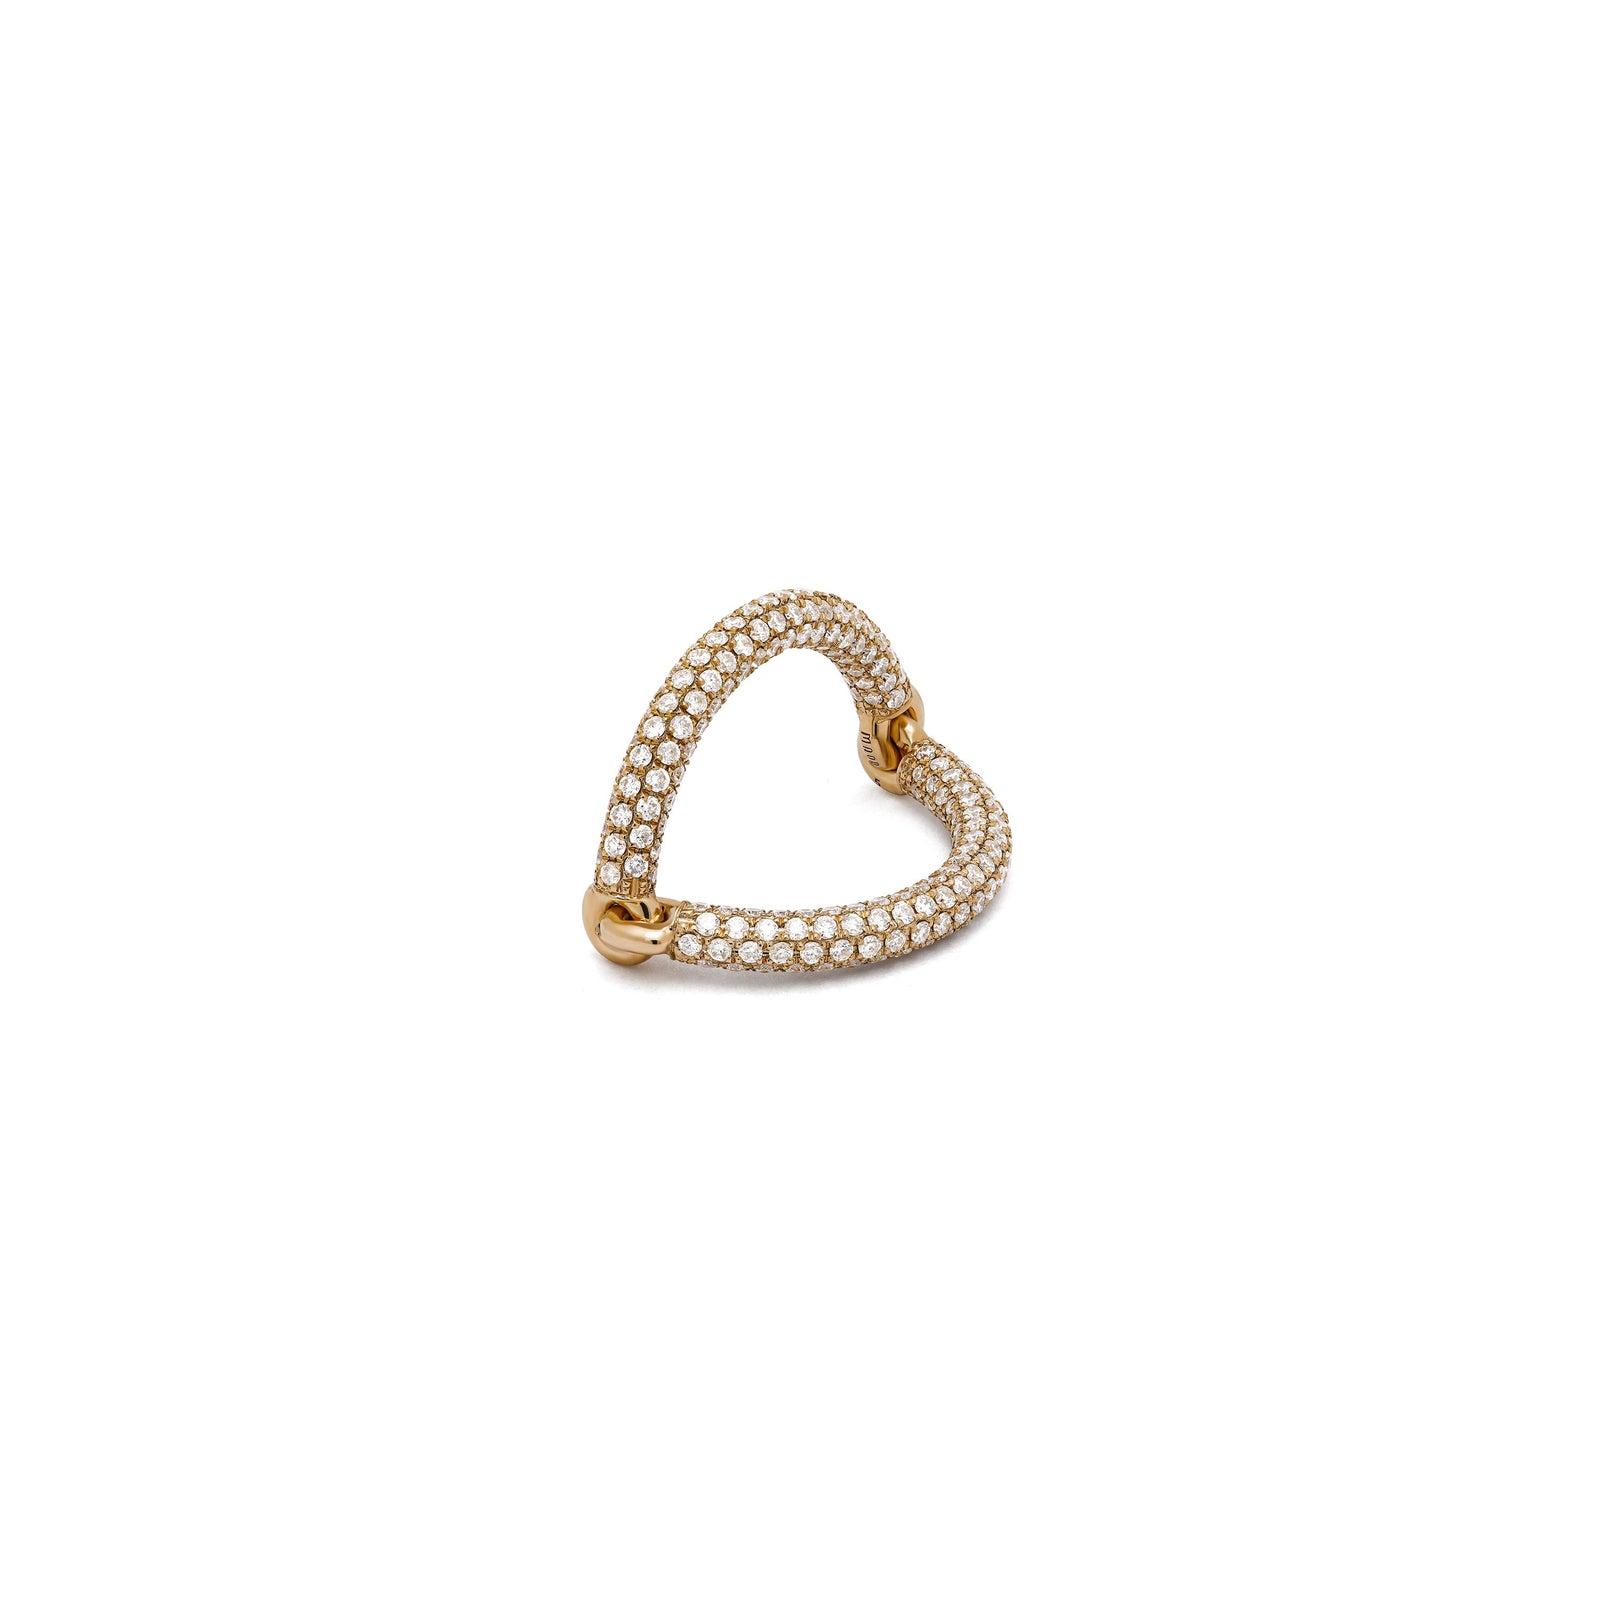 Aquila Ring | Full Pave | Yellow Gold